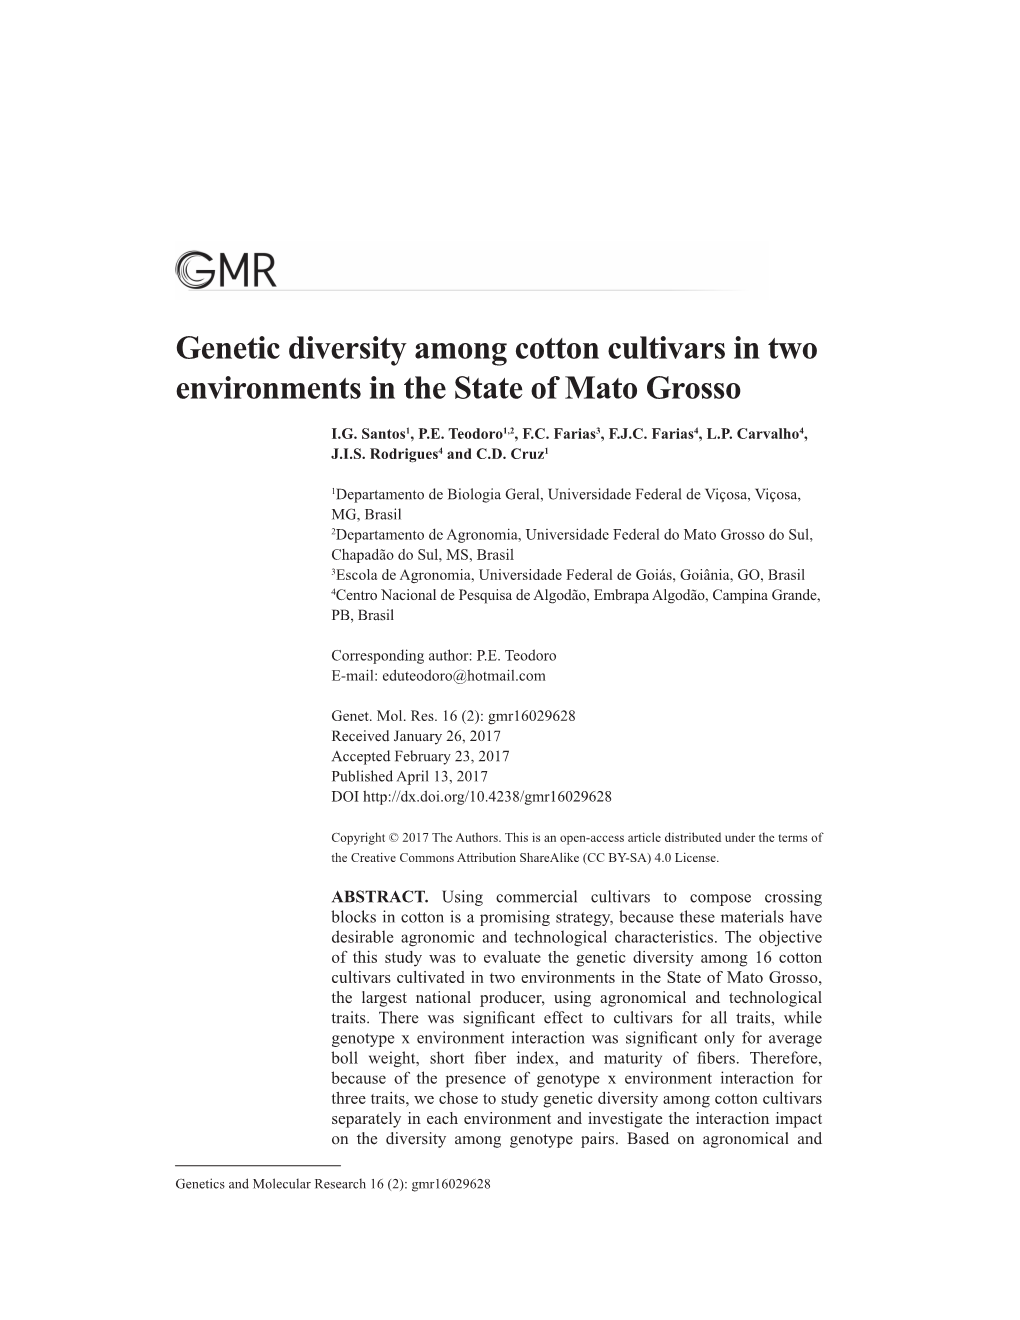 Genetic Diversity Among Cotton Cultivars in Two Environments in the State of Mato Grosso